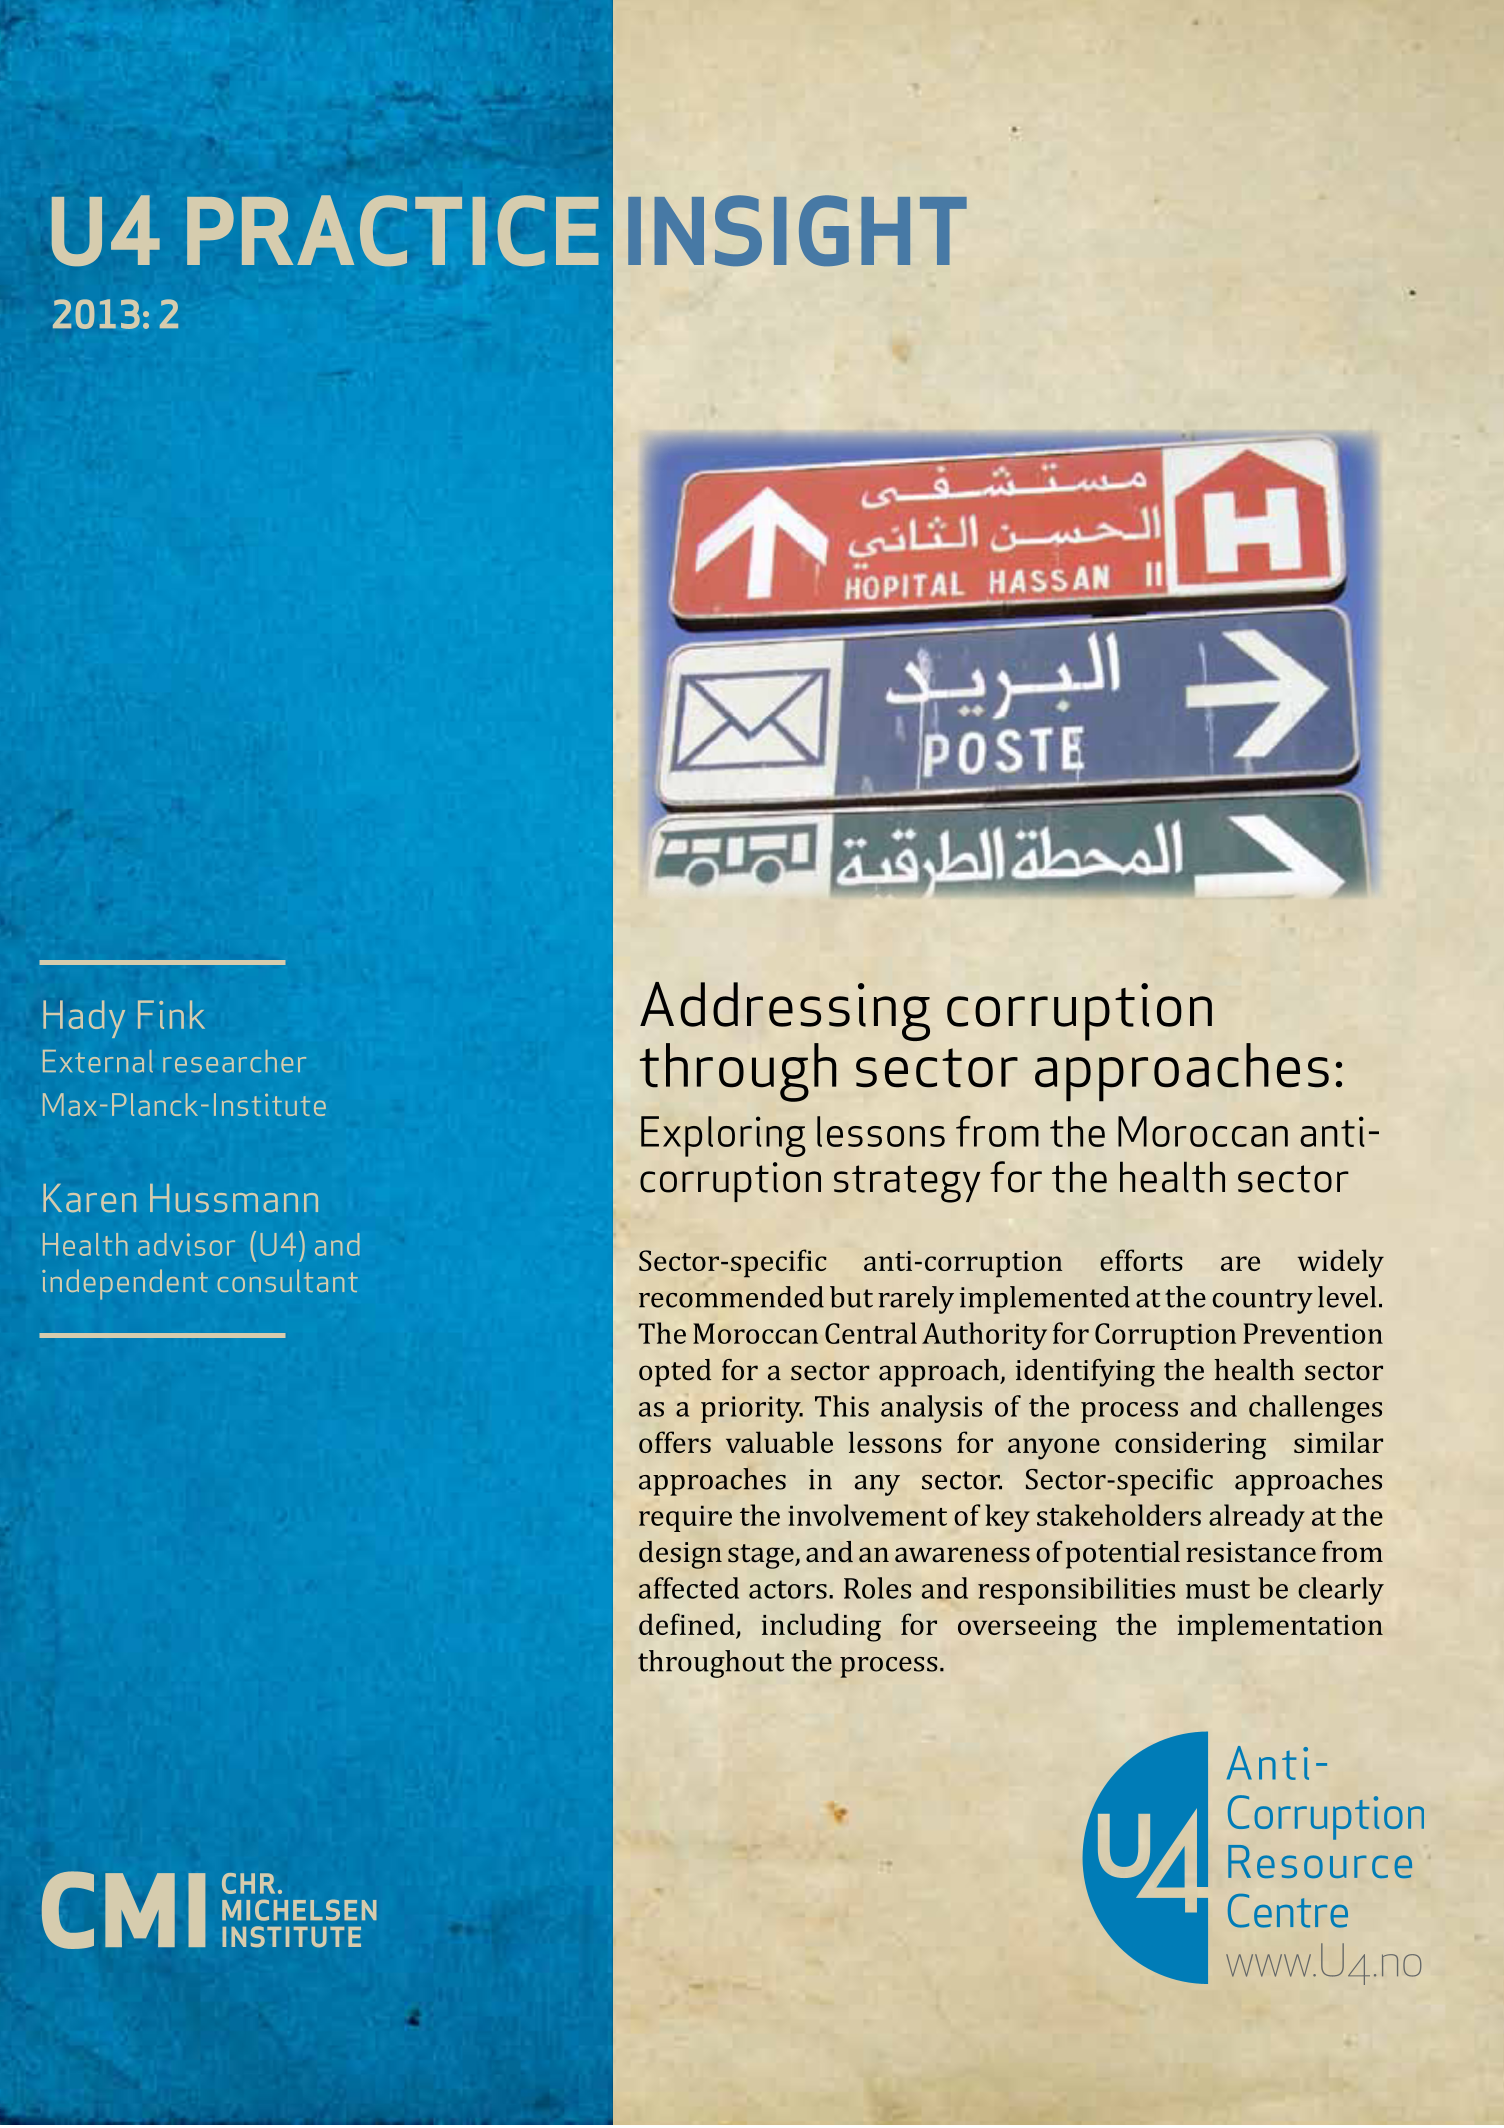 Addressing corruption through sector approaches: Exploring lessons from the Moroccan anti-corruption strategy for the health sector